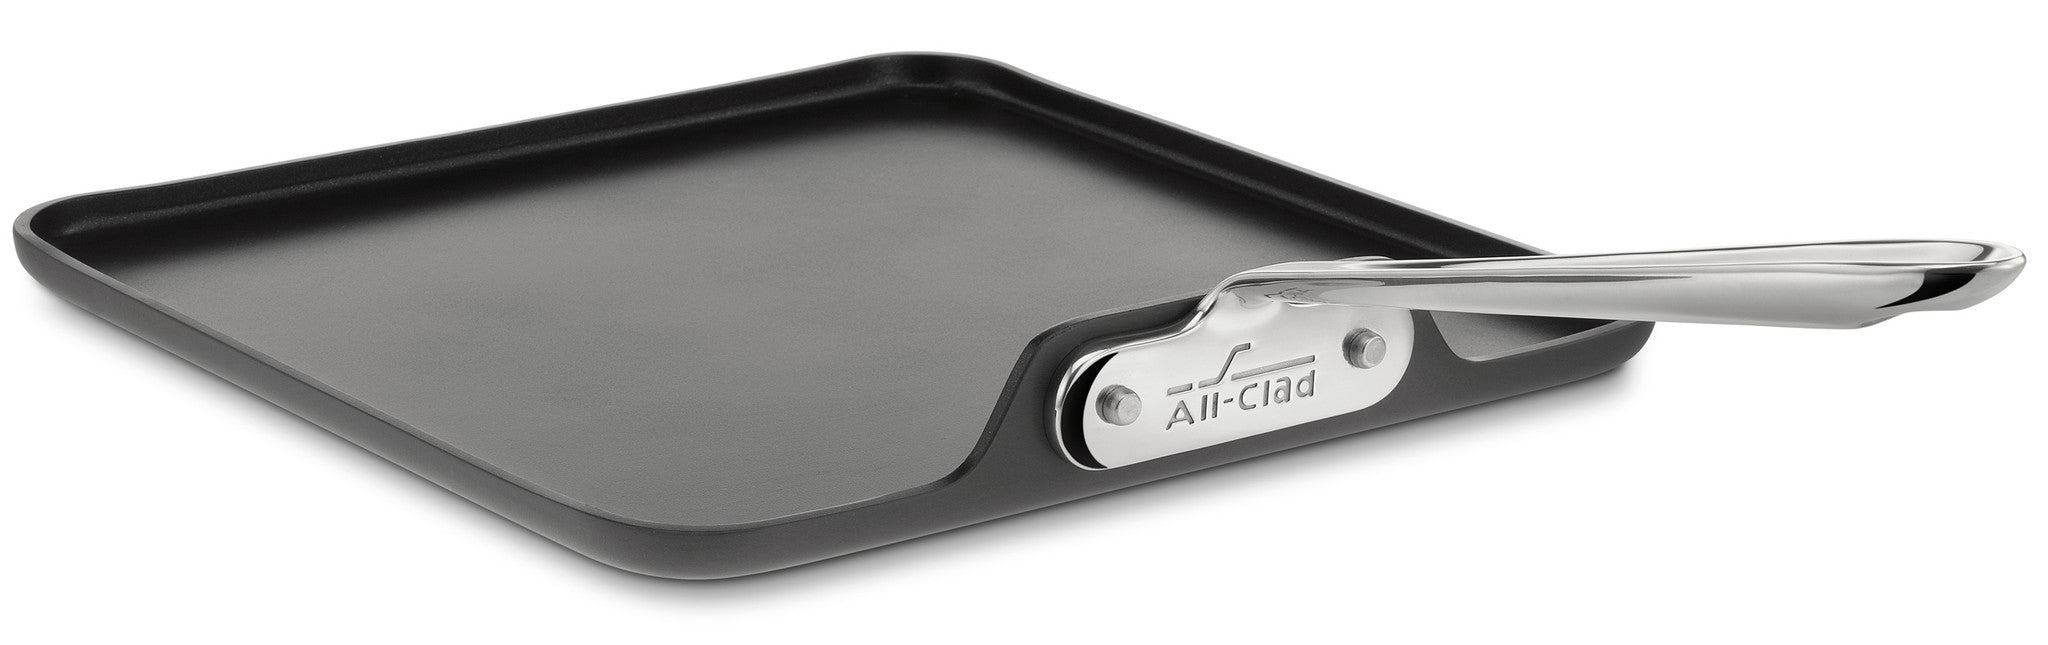 All Clad - HA1 Hard Anodized Nonstick Cookware, Square Griddle, 11 inch